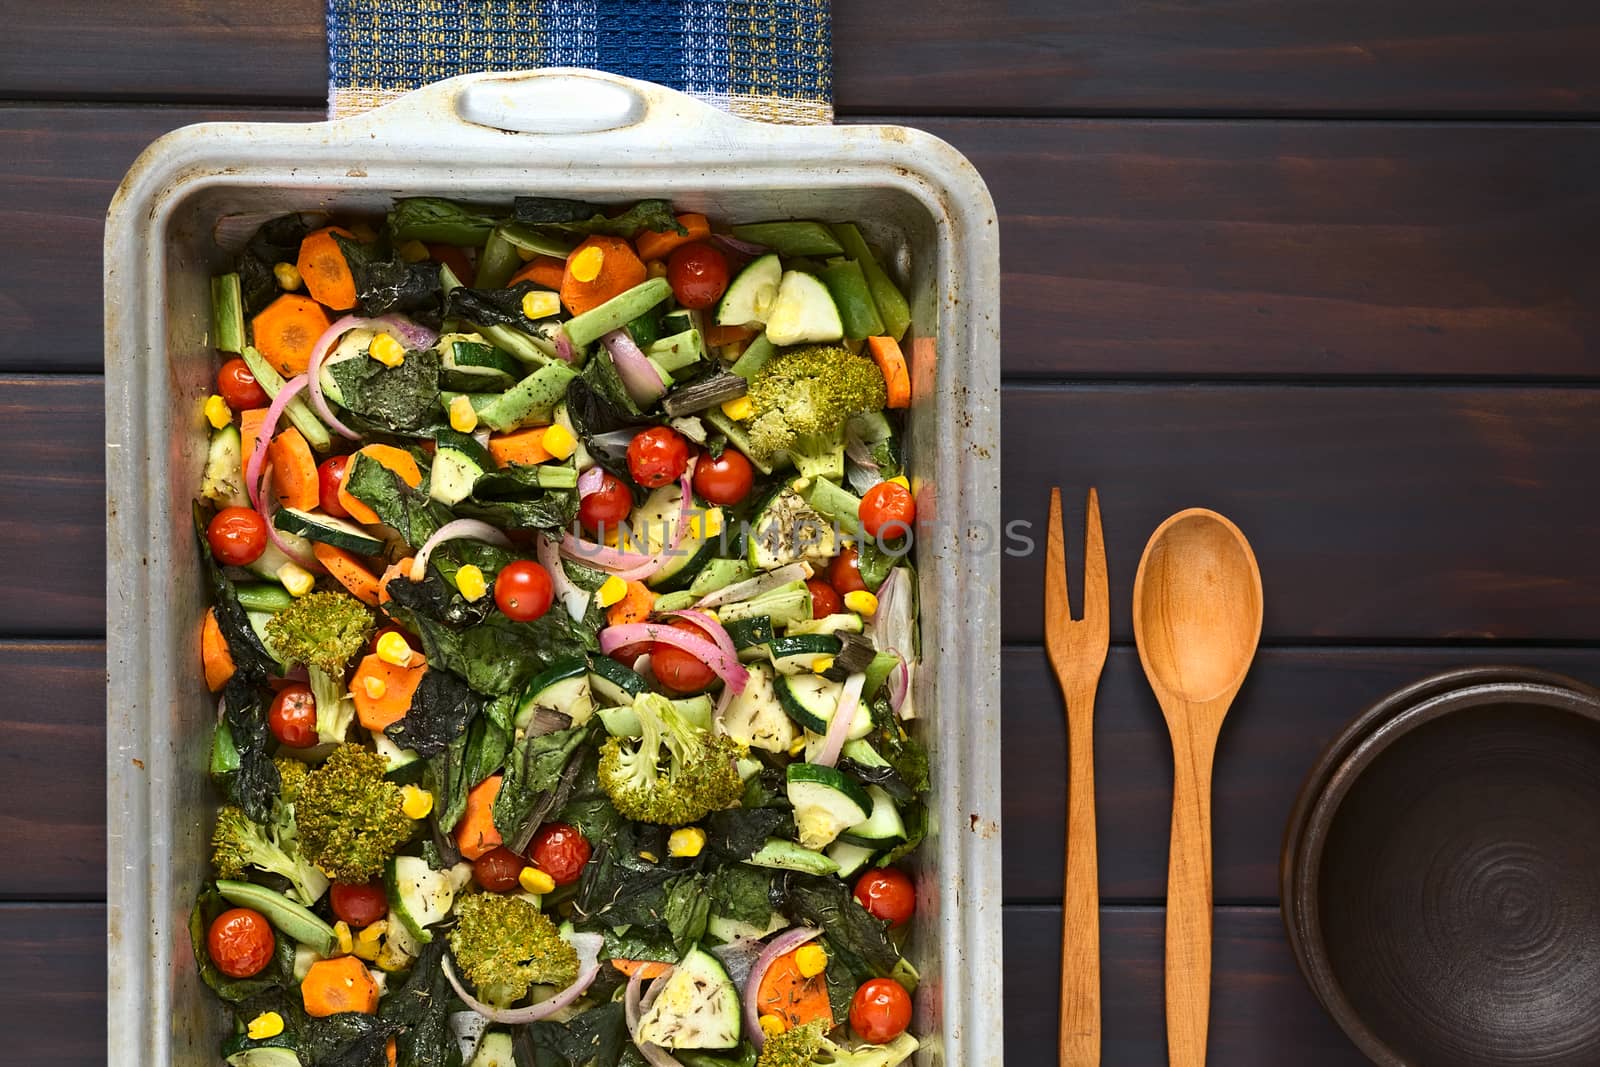 Baked Vegetables in Baking Dish  by ildi